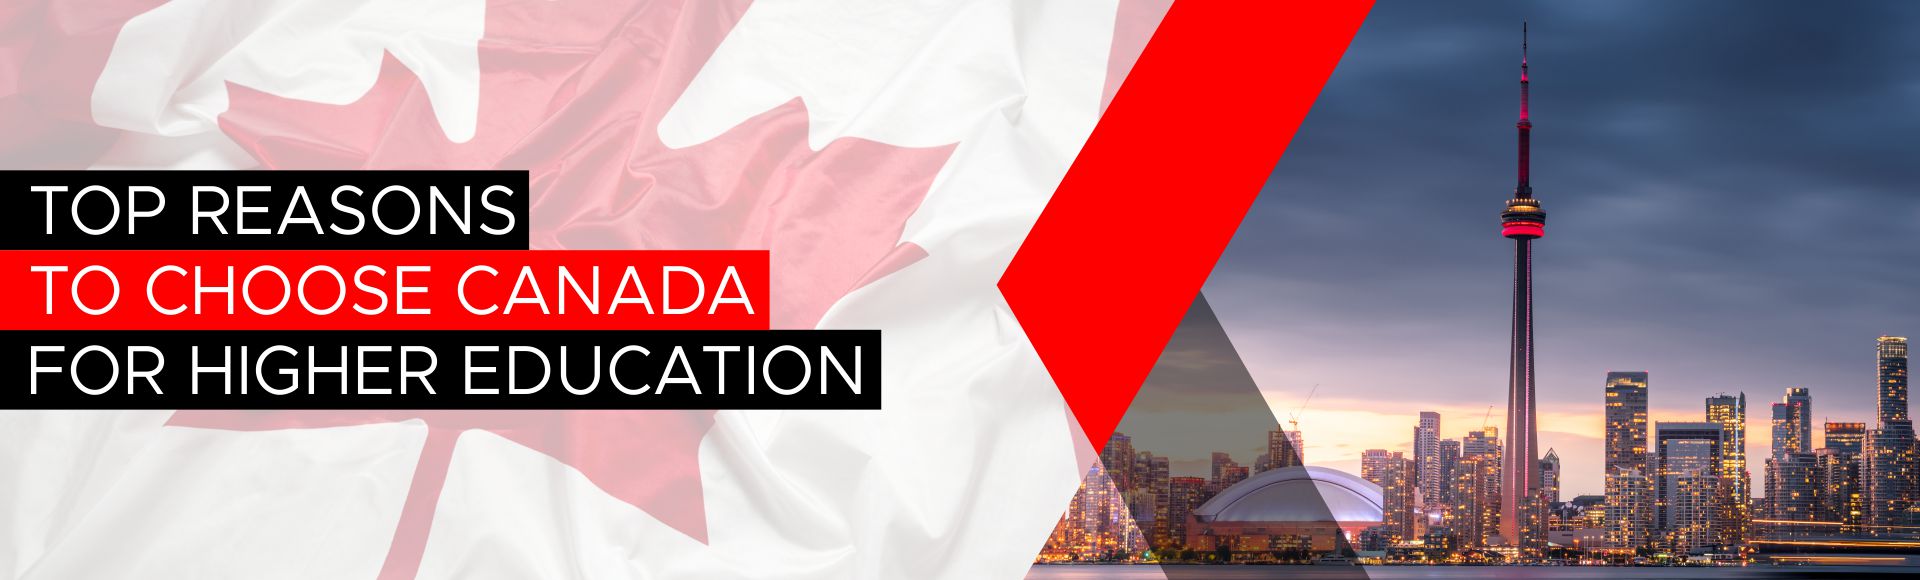 Top Reasons to Choose Canada for Higher education